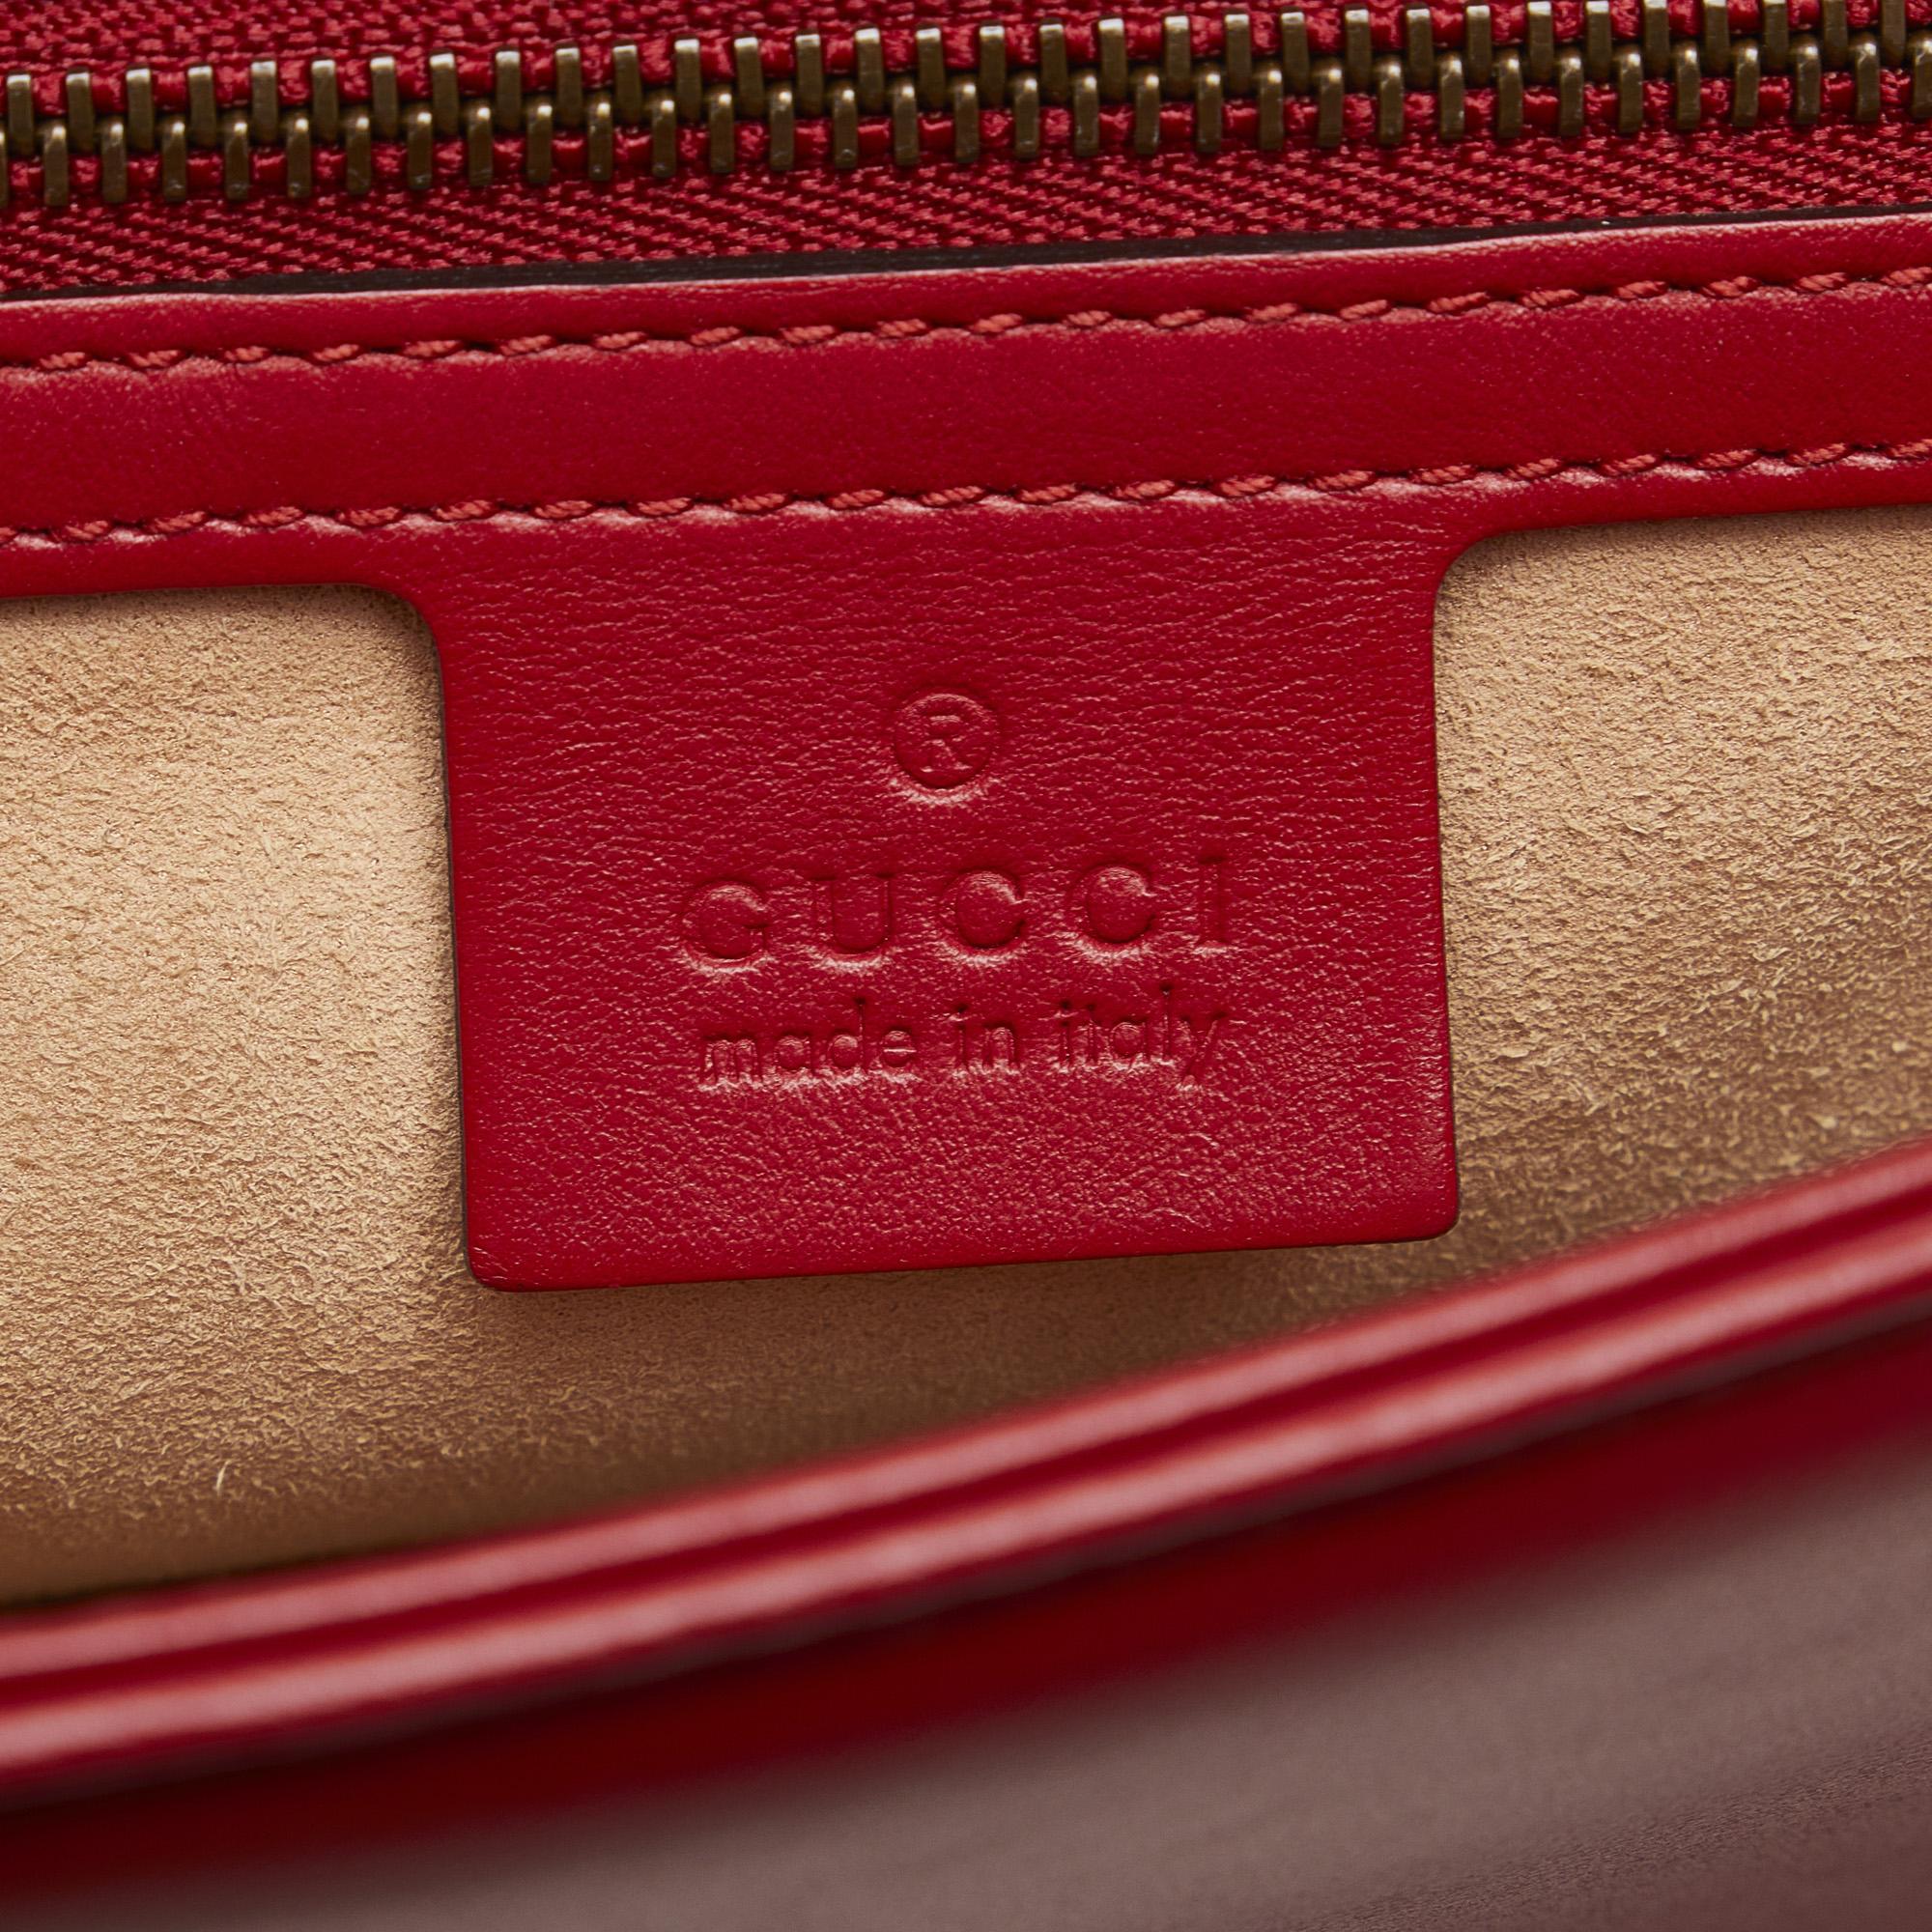 Gucci Red GG Marmont Leather Satchel